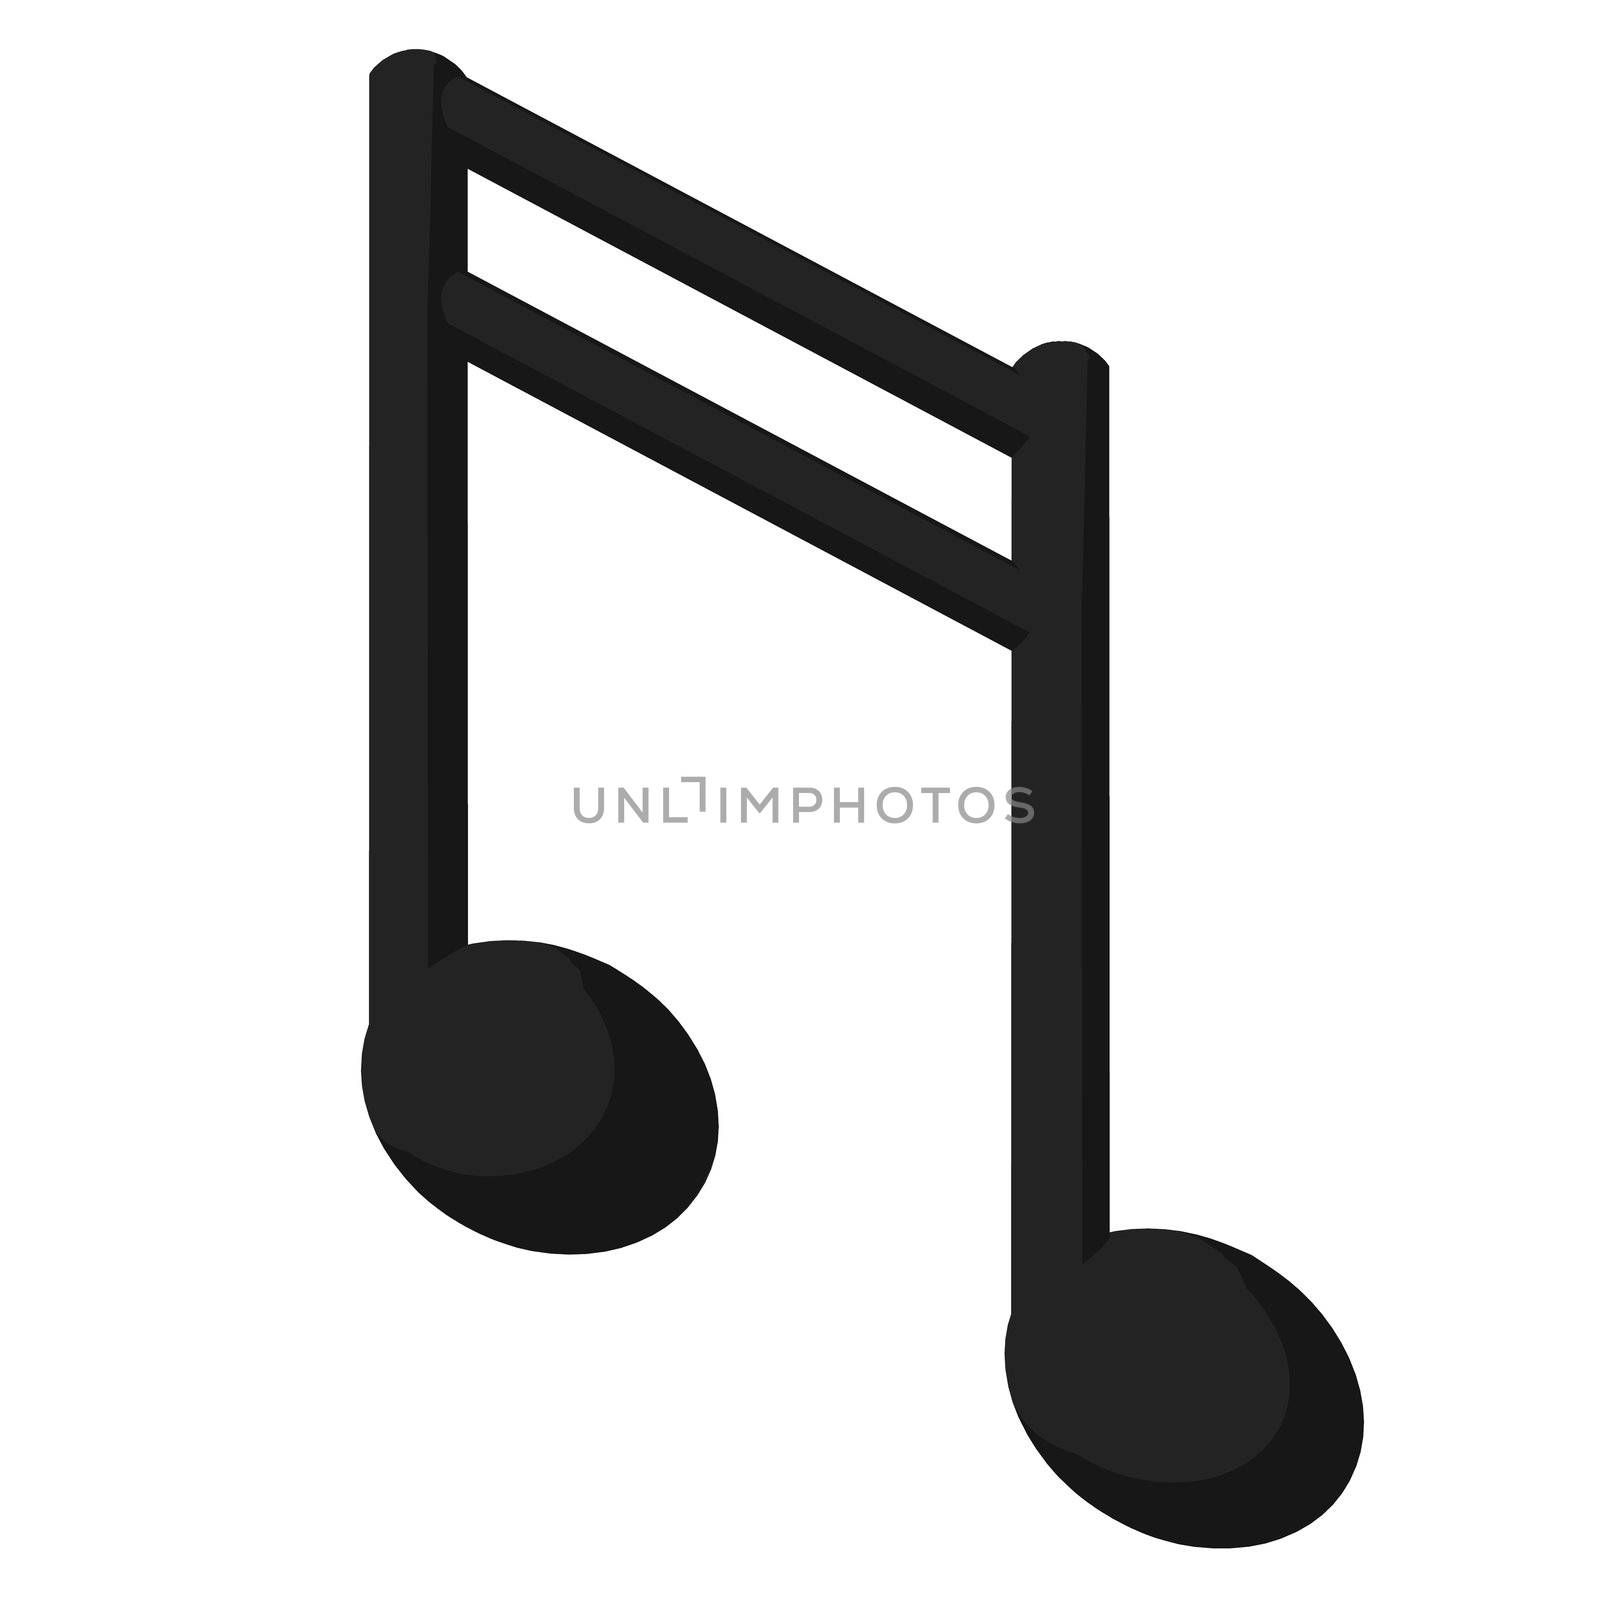 Illustration of a musical note on a white background